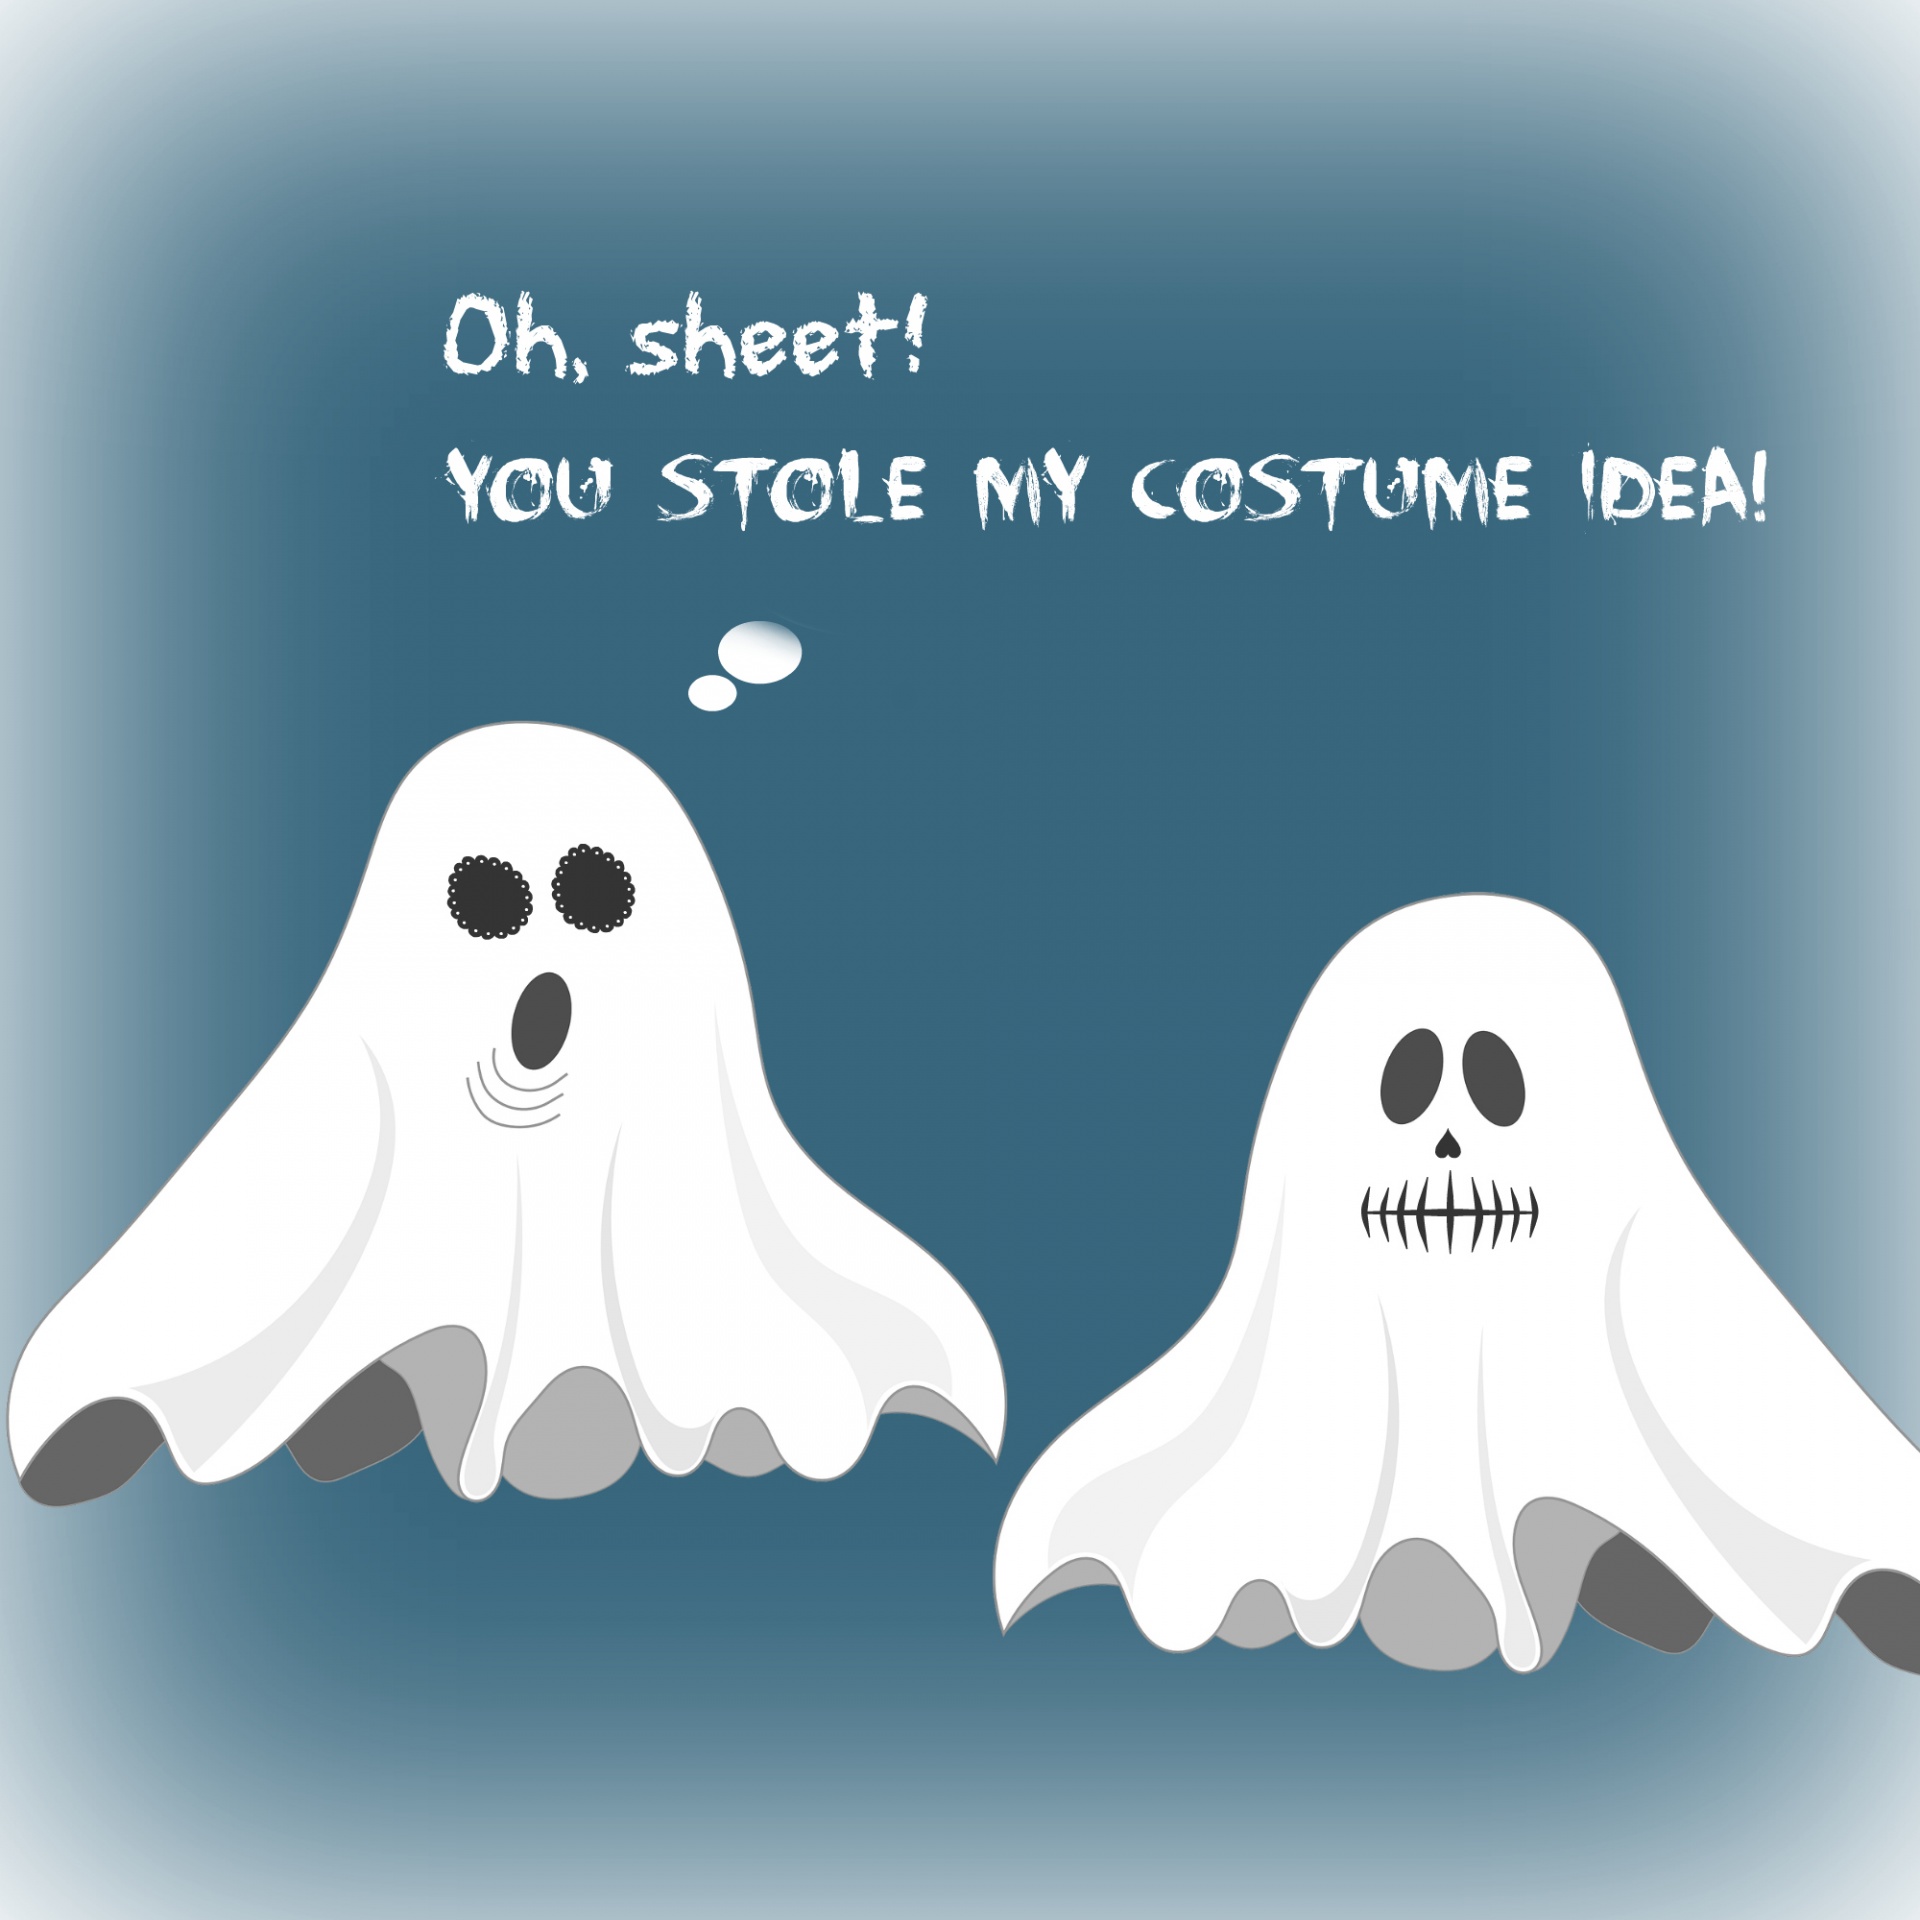 Free Halloween Ecard With Ghosts Free Stock Photo - Public Domain Pictures